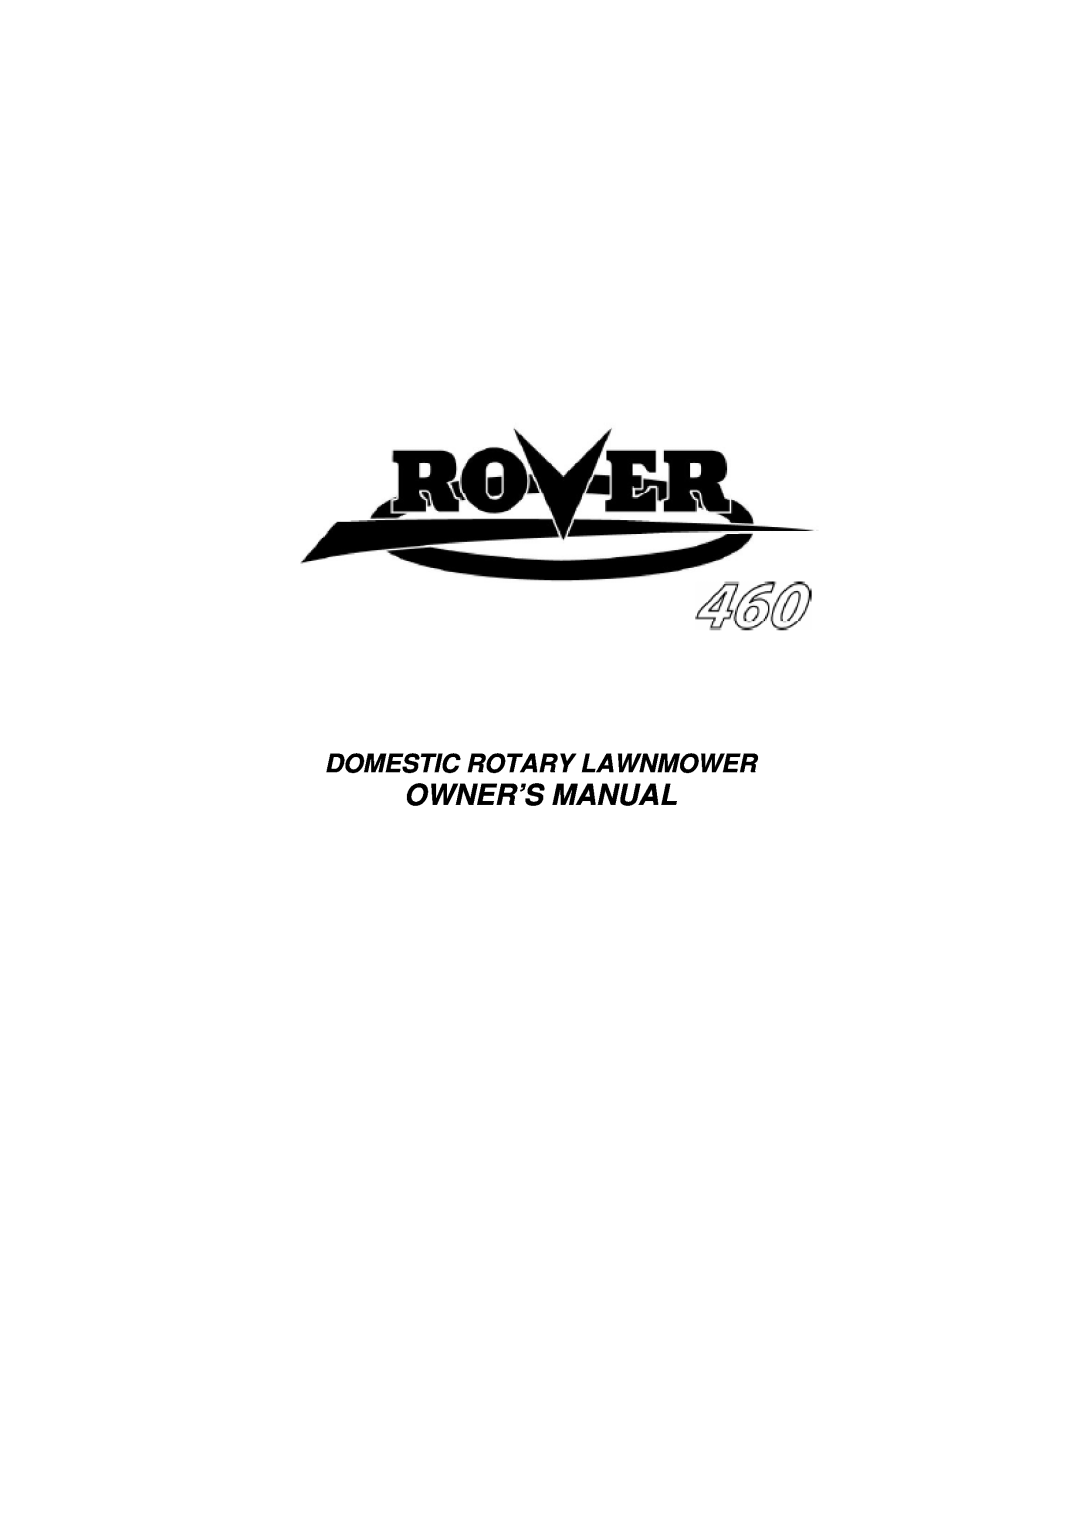 Rover 460 owner manual Domestic Rotary Lawnmower 